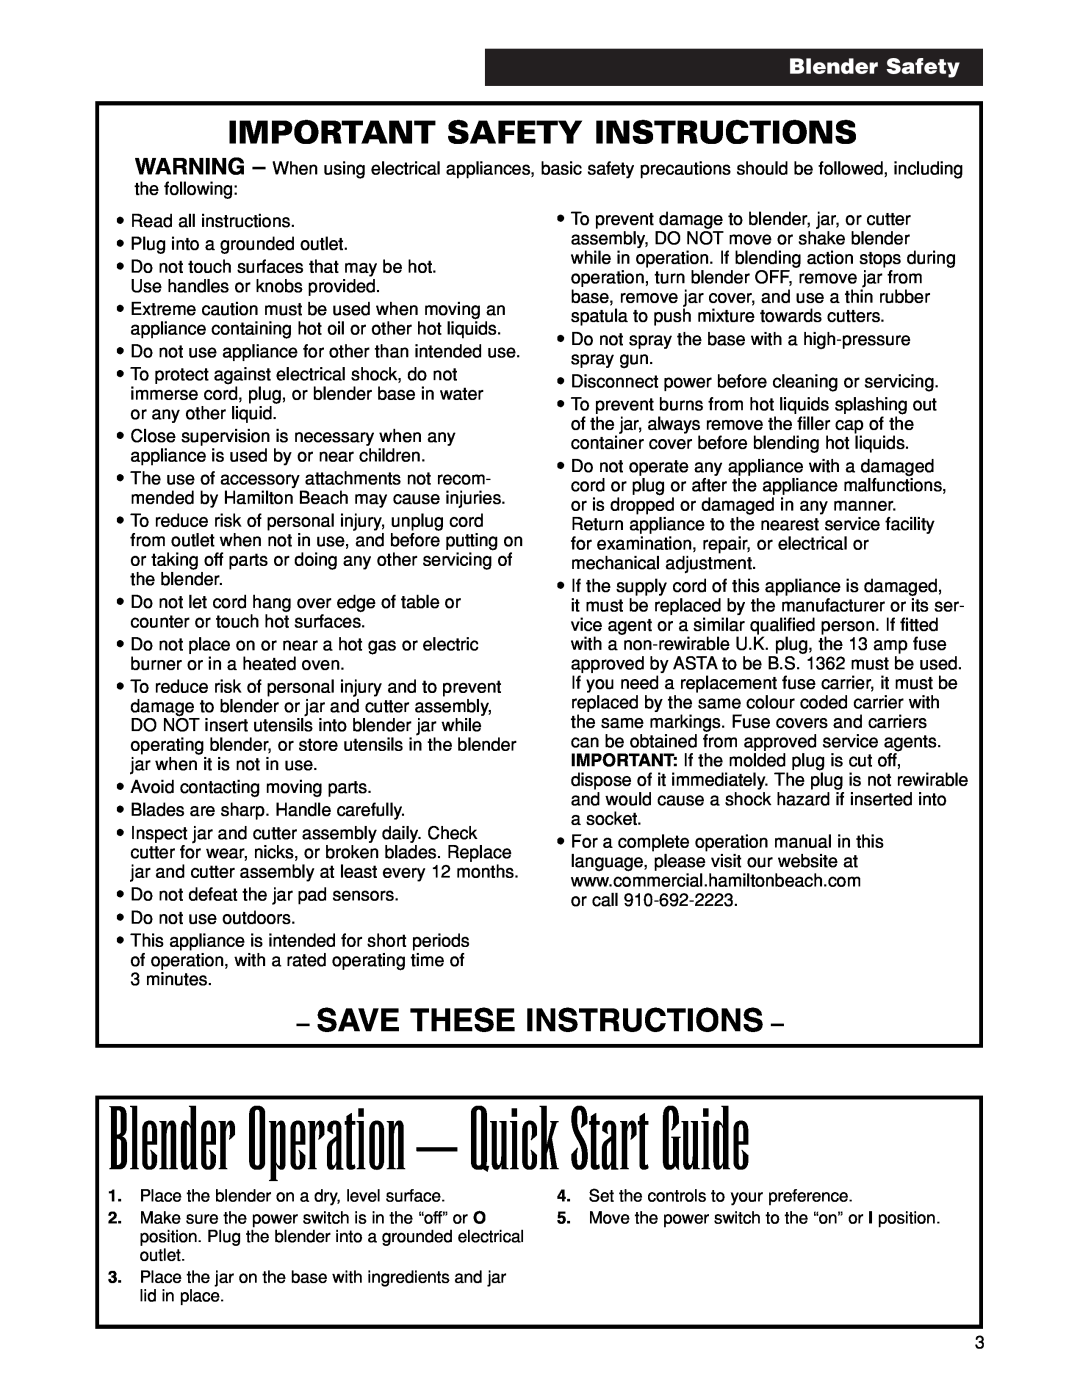 Hamilton Beach 1G901 operation manual Blender Safety, Blender Operation - Quick Start Guide, Important Safety Instructions 